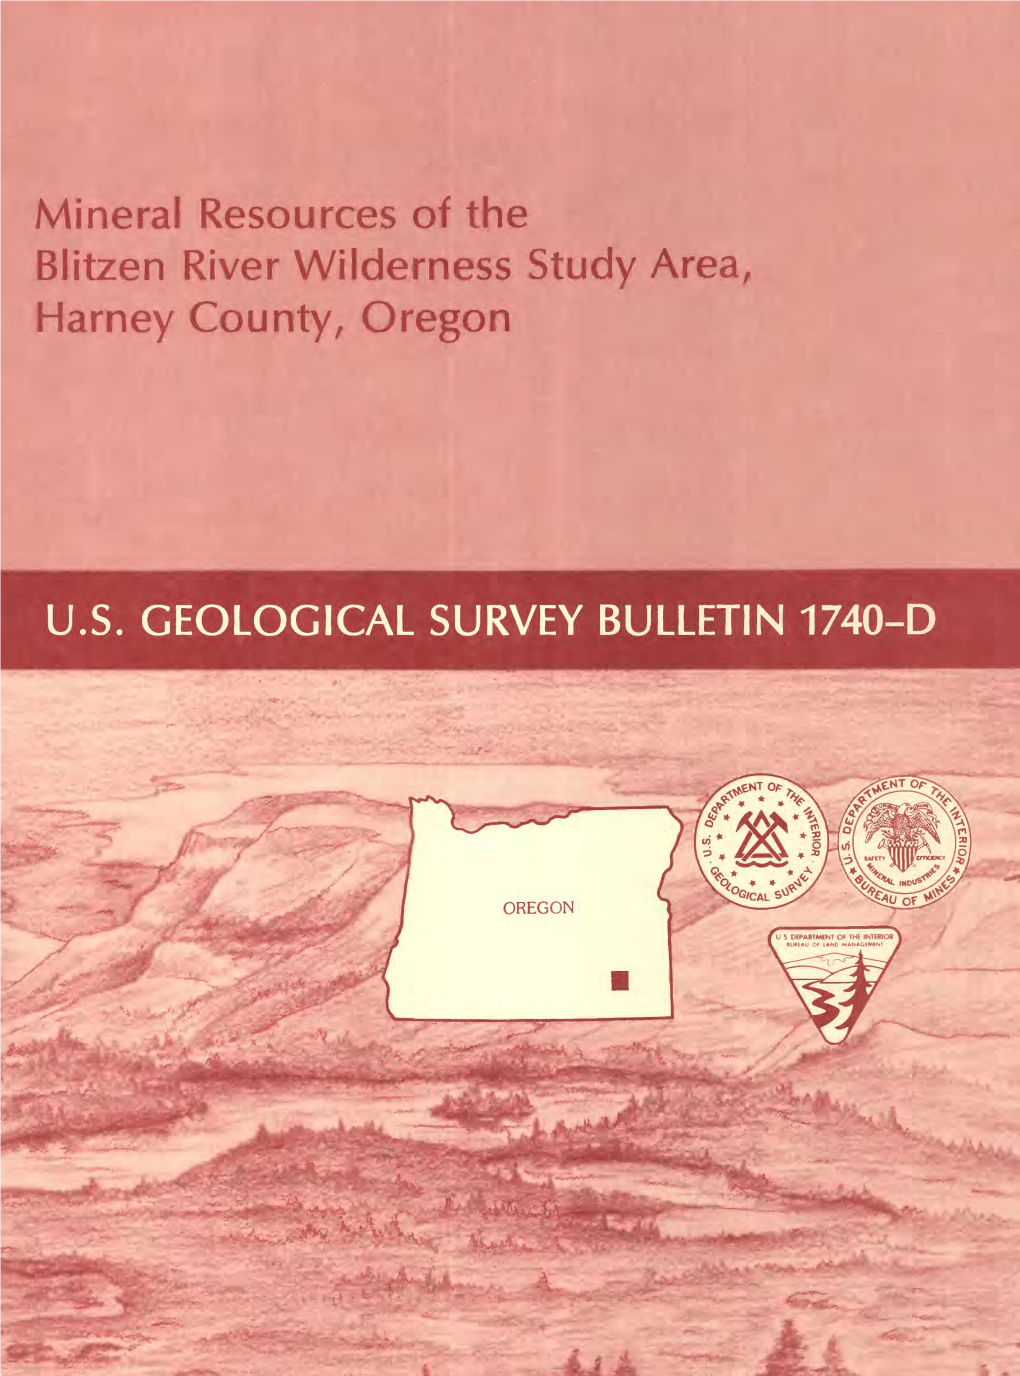 Mineral Resources of the Blitzen River Wilderness Study Area, Harney County, Oregon